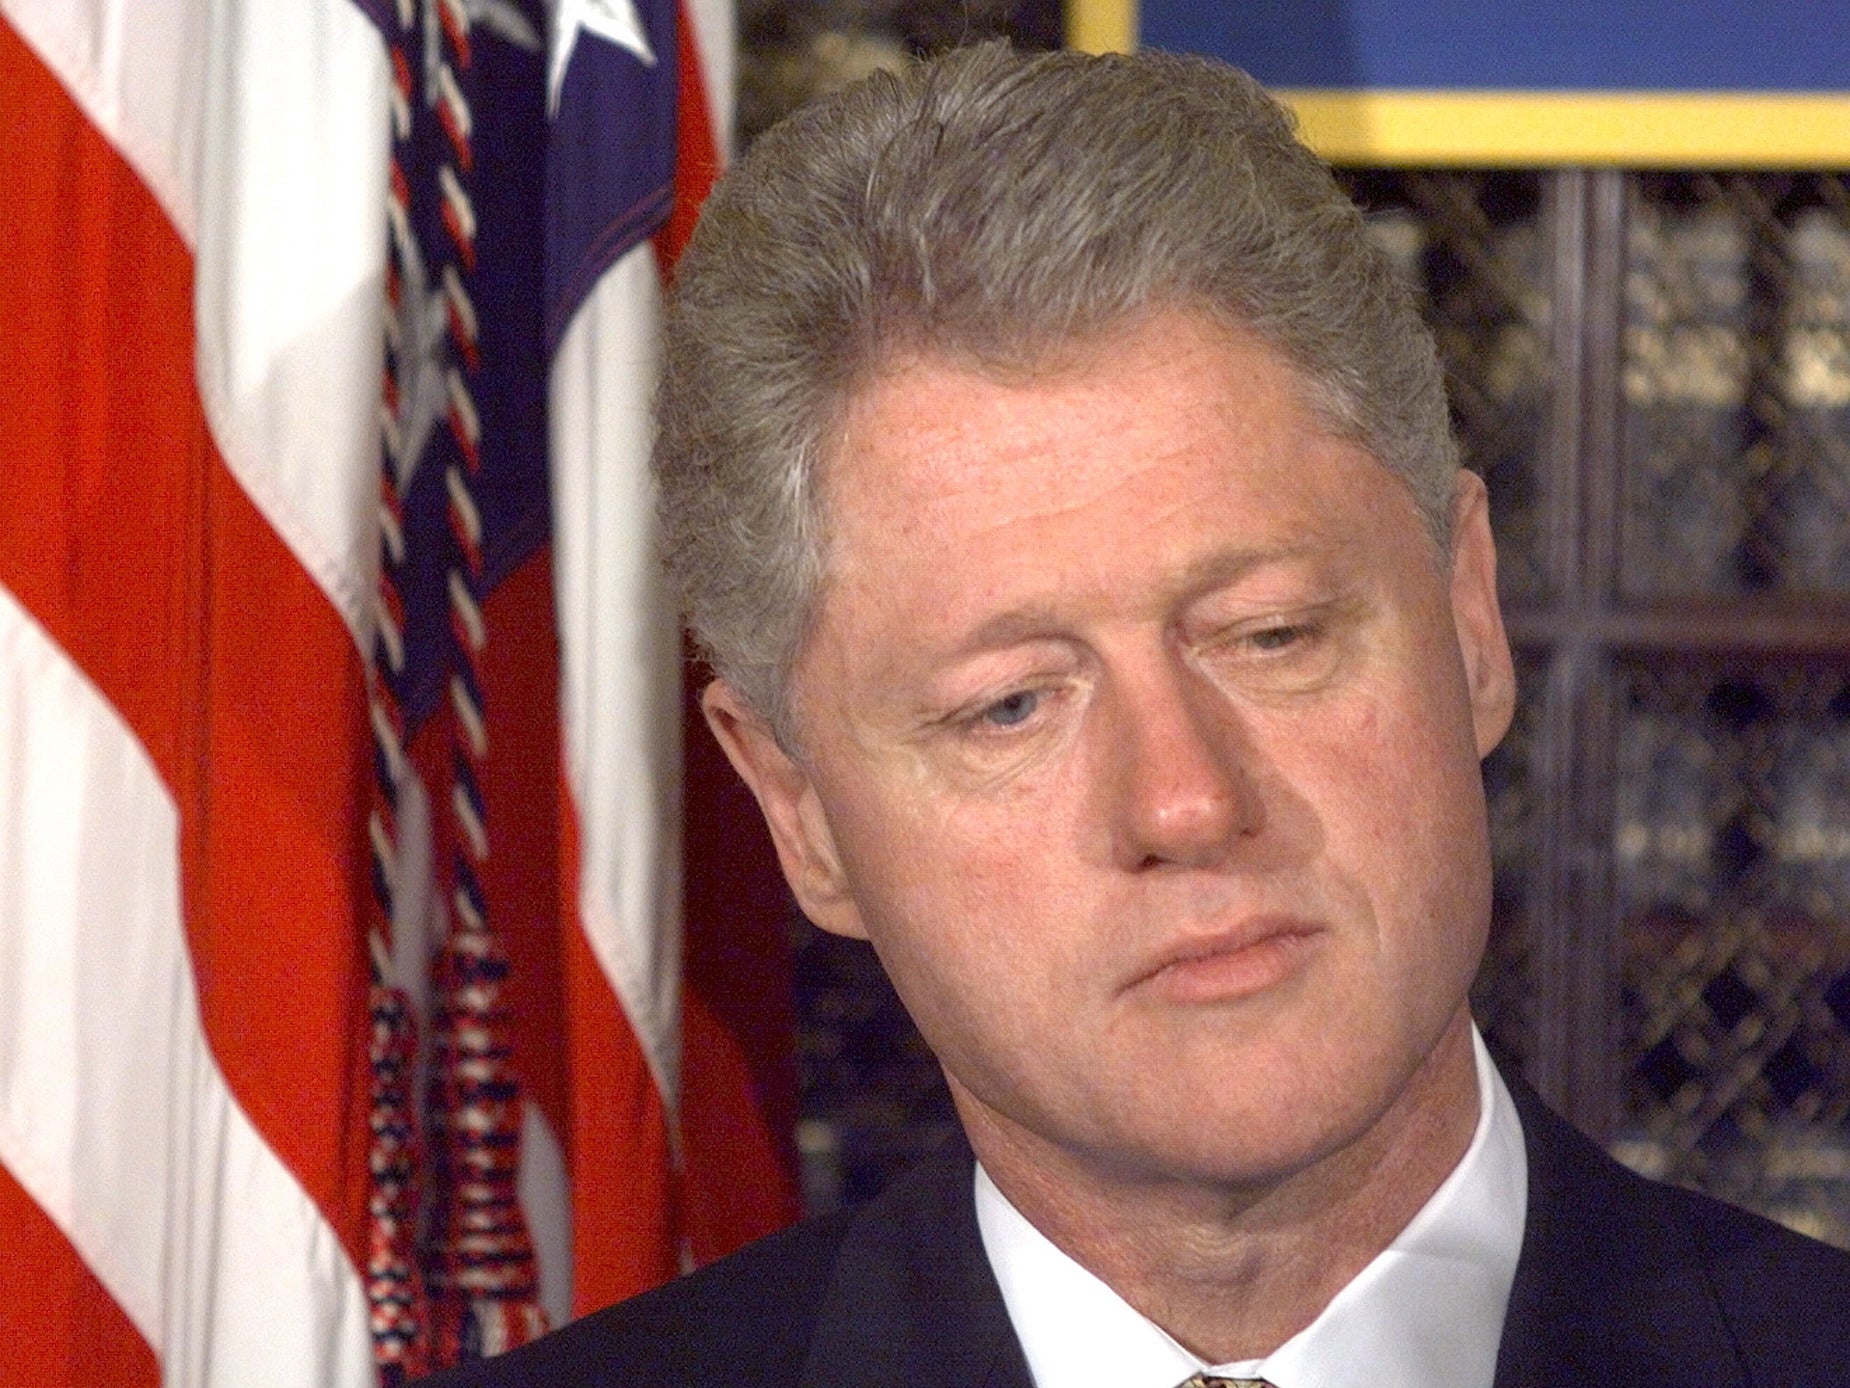 Bill Clinton in the Roosevelt Room of the White House as the House of Representatives conducts a full vote on whether to proceed with impeachment proceedings on 8 October 1998